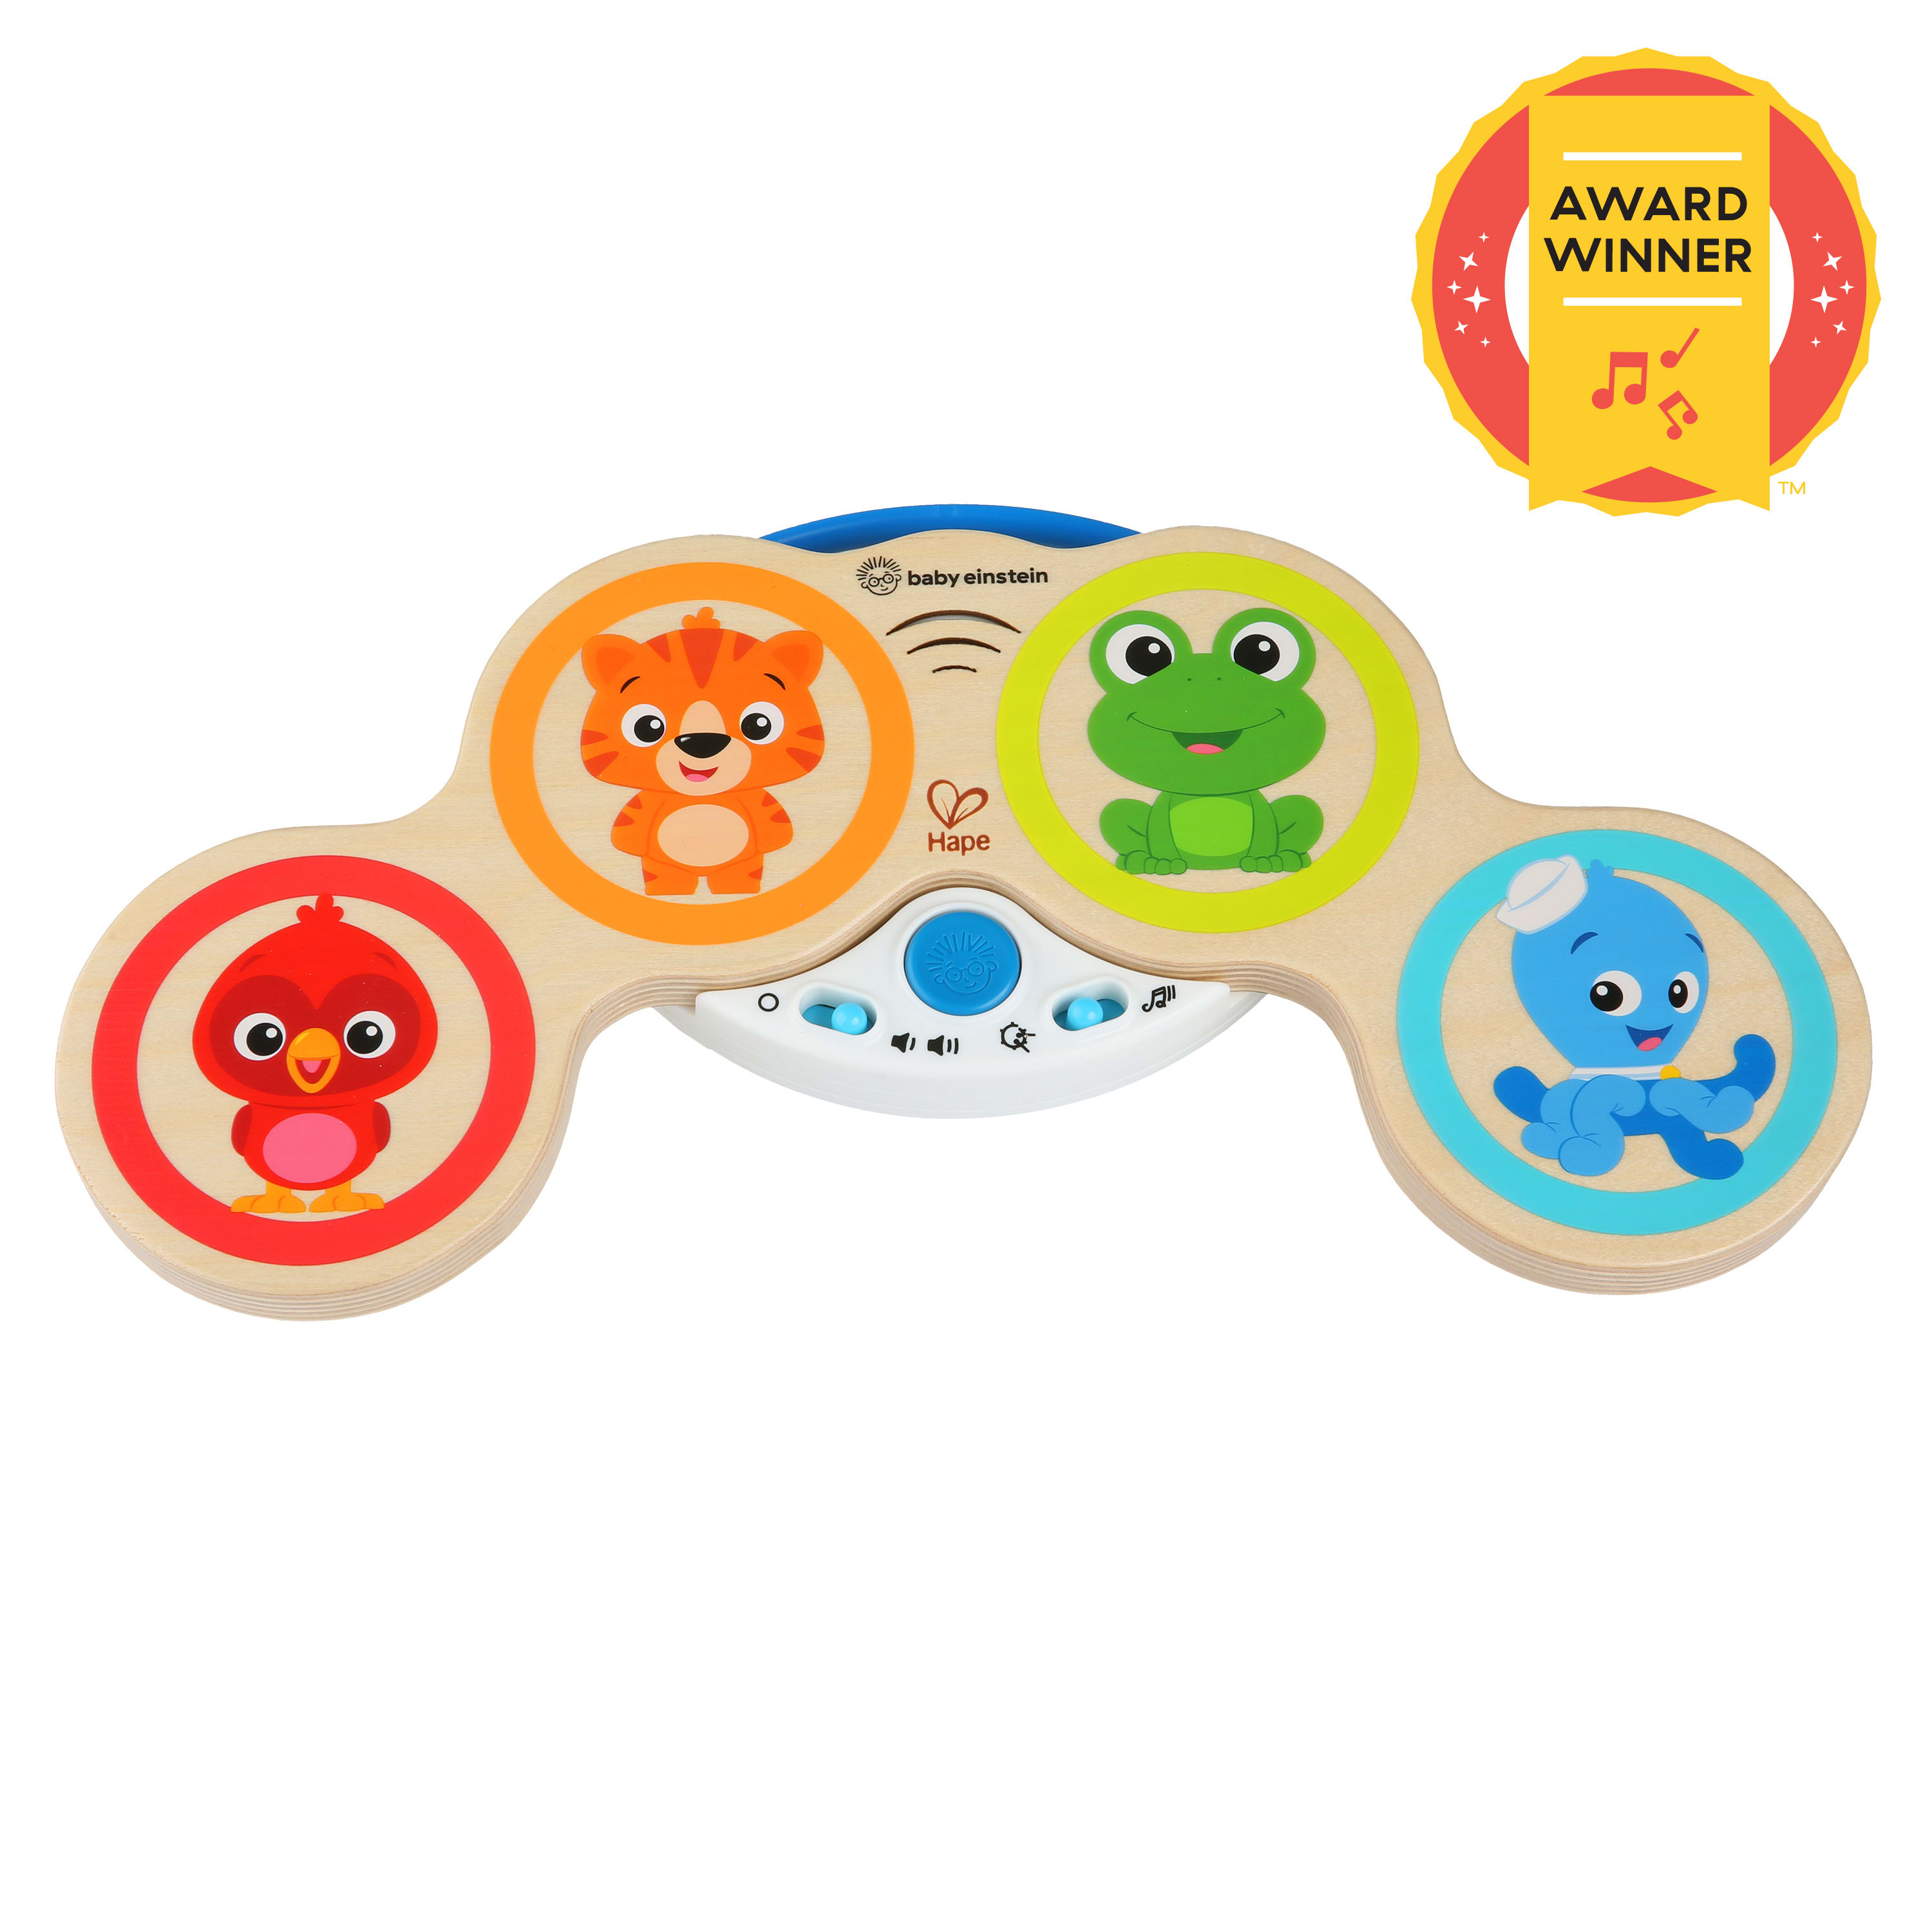 Baby Einstein Magic Touch Drums Wooden Musical Baby Toy, Unisex, Ages 6 months+ - image 1 of 6